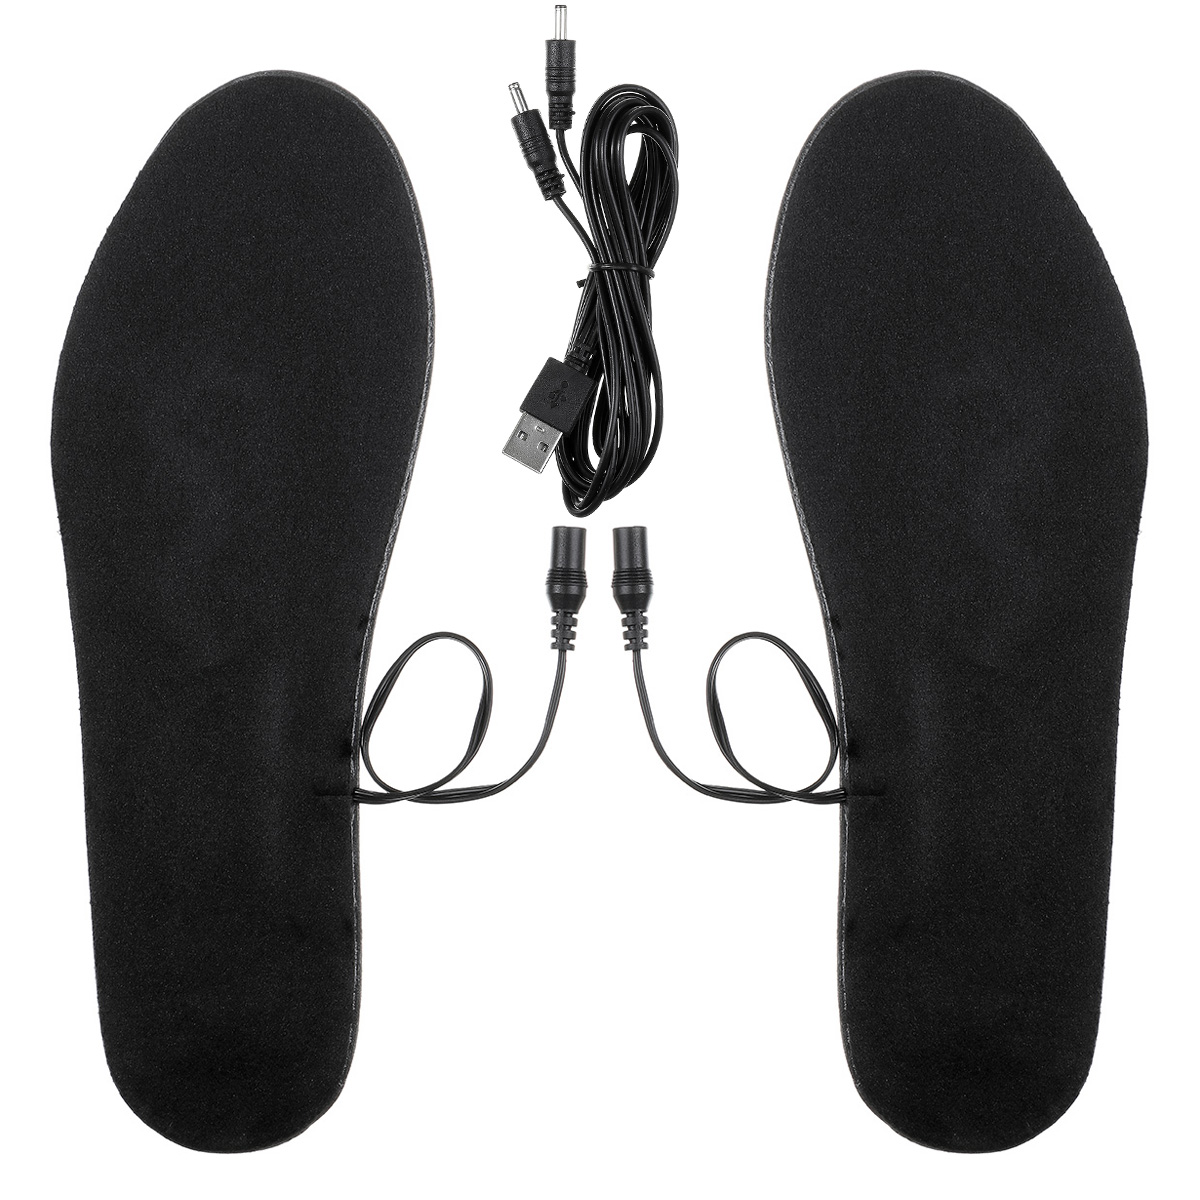 

USB Charge Cuttable Electric Heated Insole Battery Powered Winter Heating Shoes Pad For Shoes Keep Feet Warmer Carbon Fi